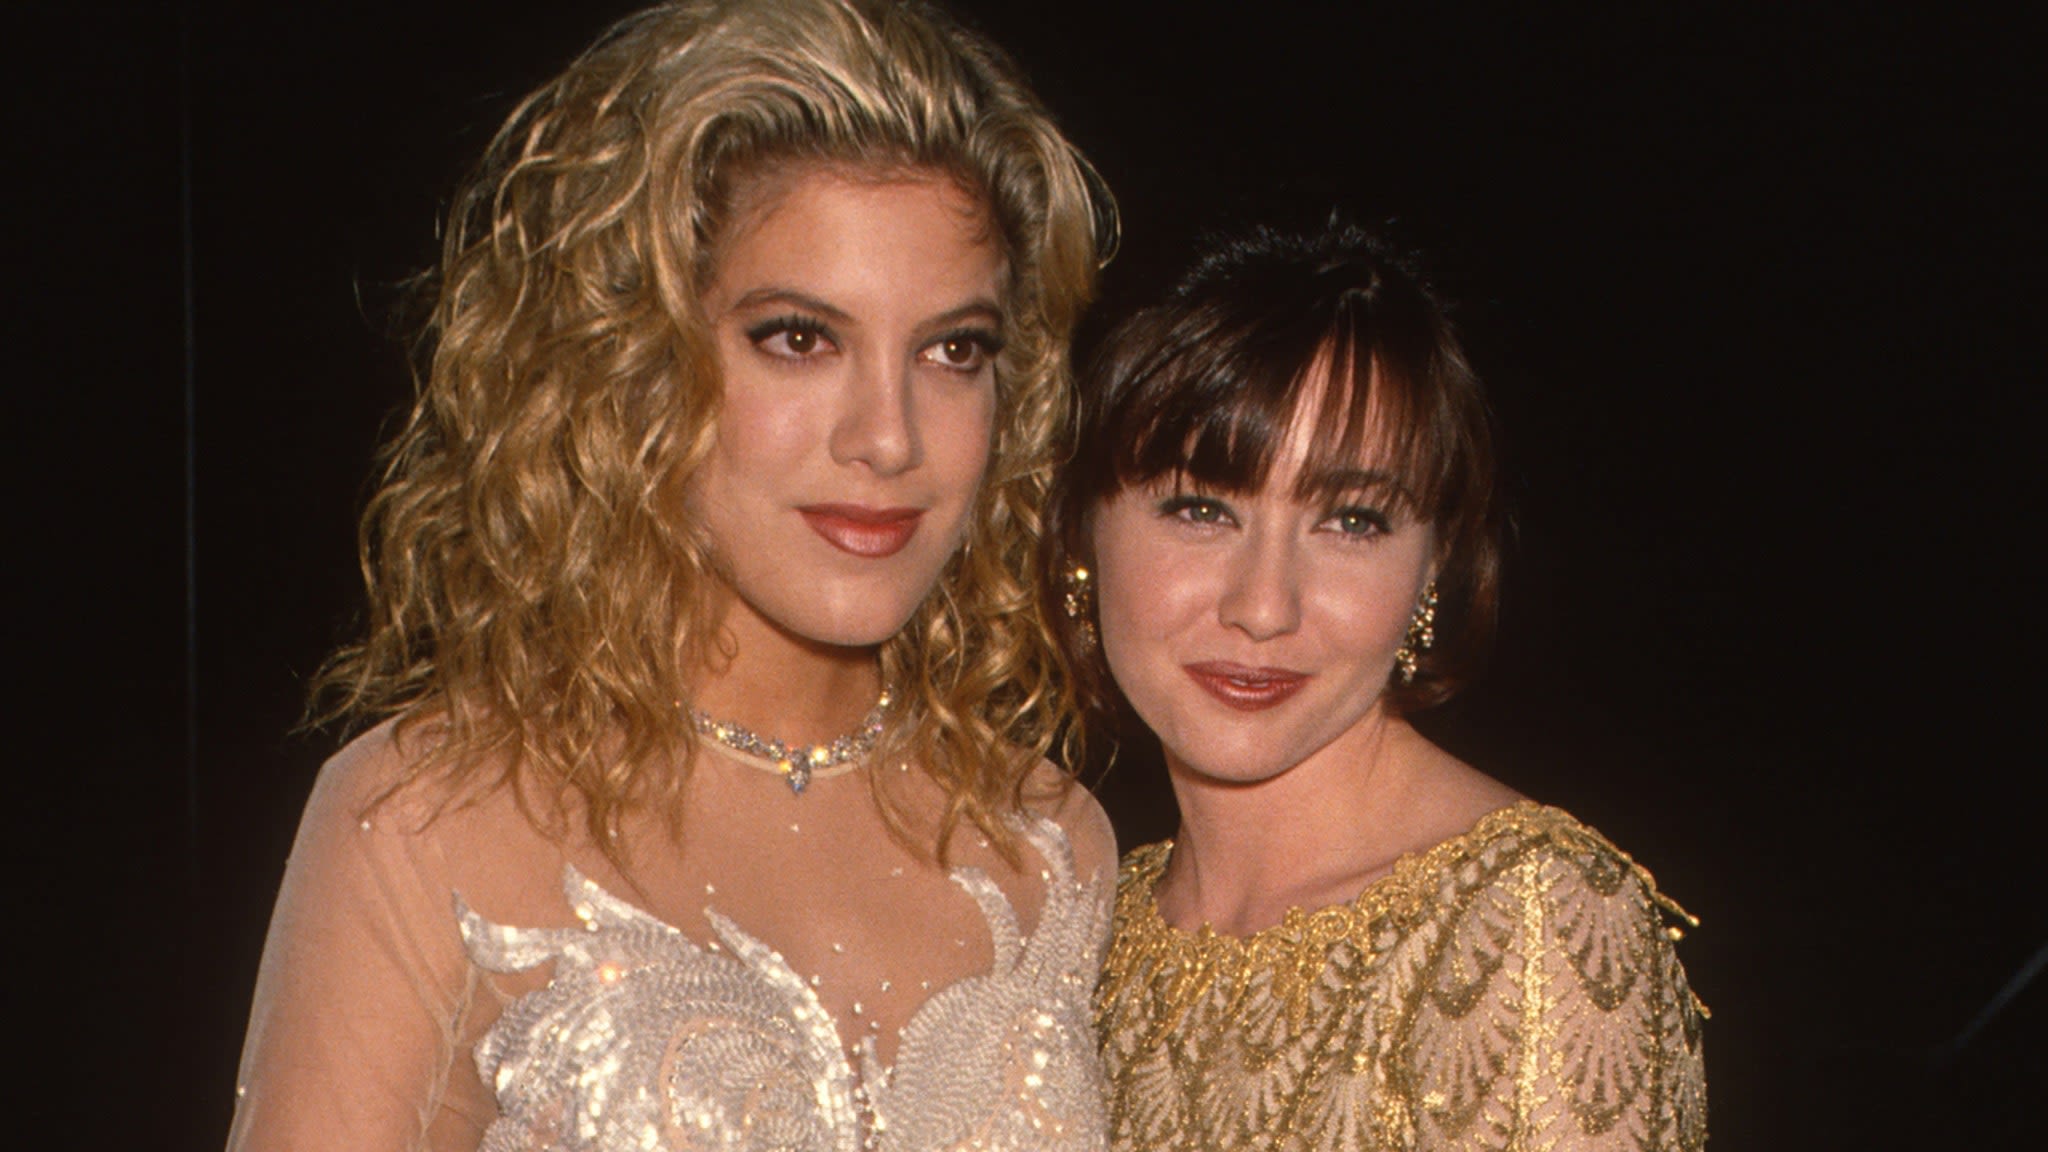 Tori Spelling Opens Up About Final Conversation With Beverly Hills, 90210 Co-Star Shannen Doherty